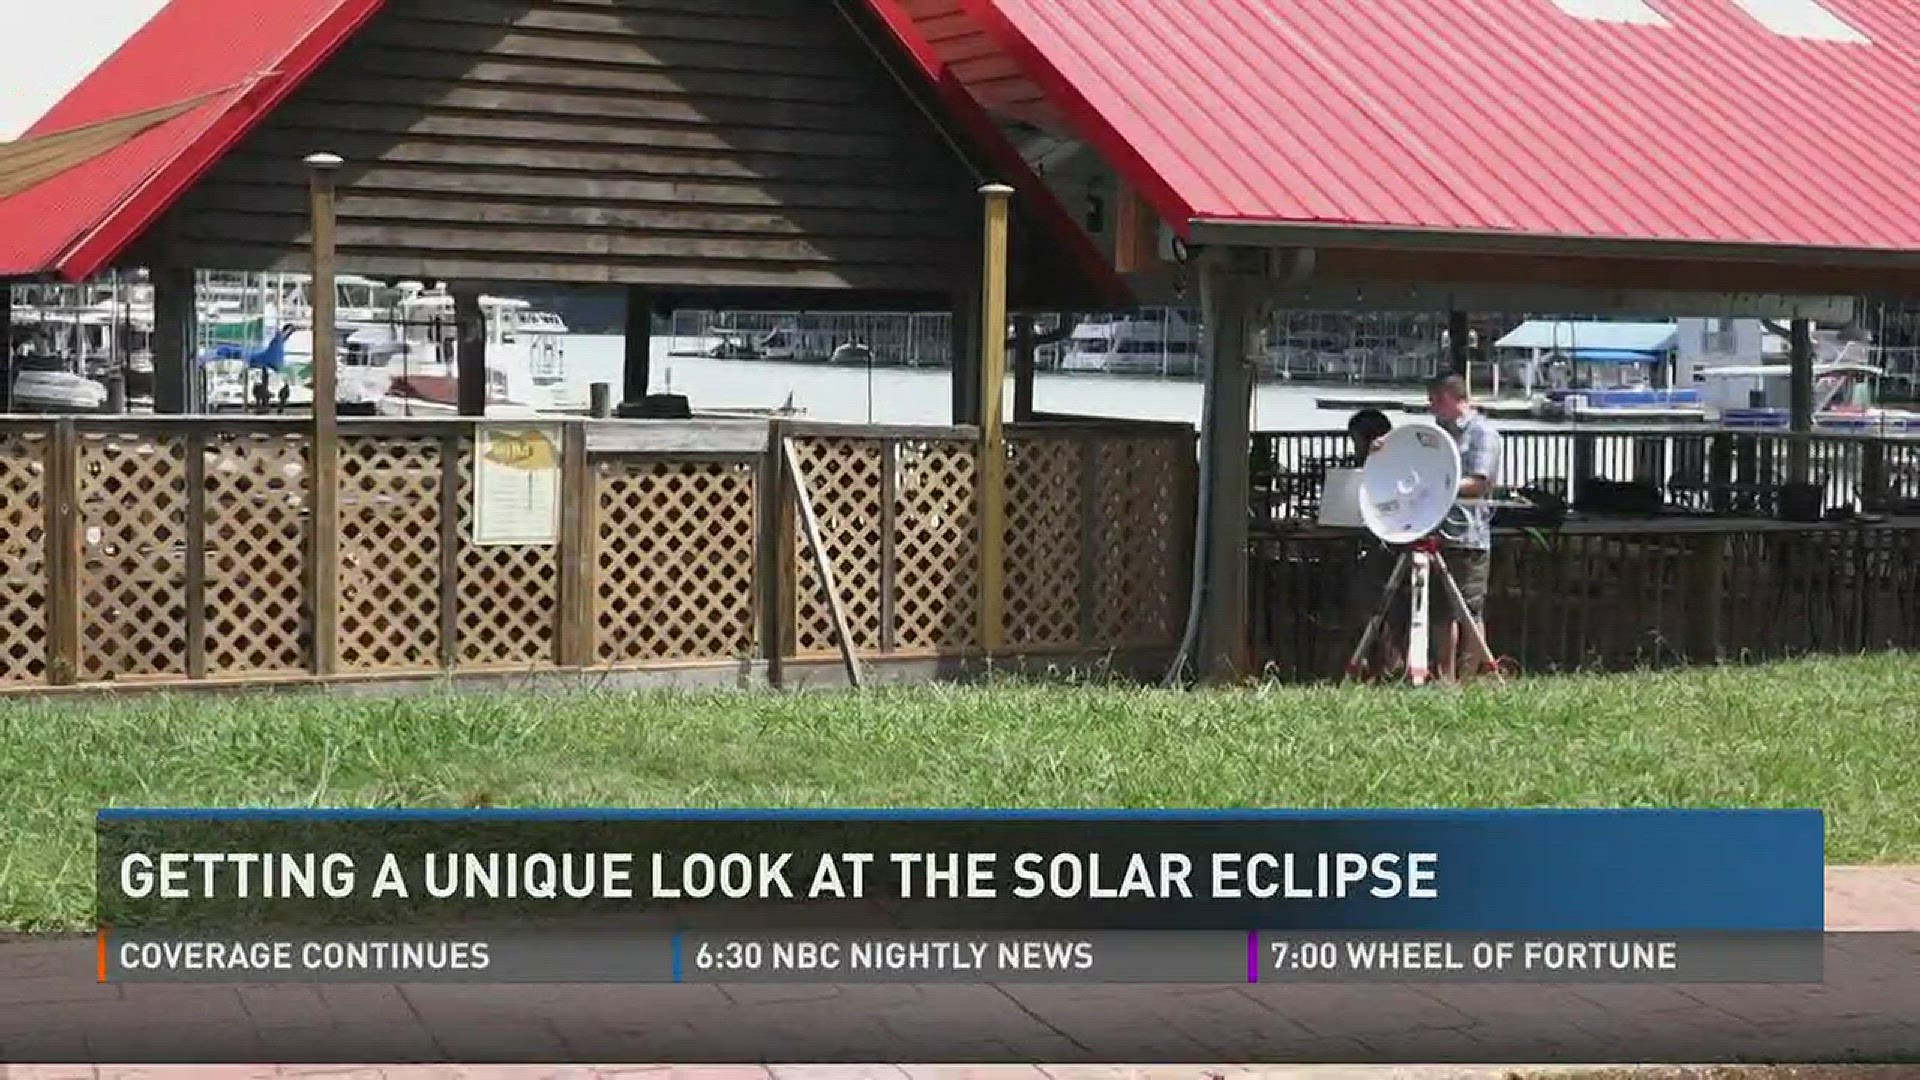 June 20, 2017: Researchers from Pellissippi State Community College are working to get a unique perspective on the coming solar eclipse as part of a project with NASA.